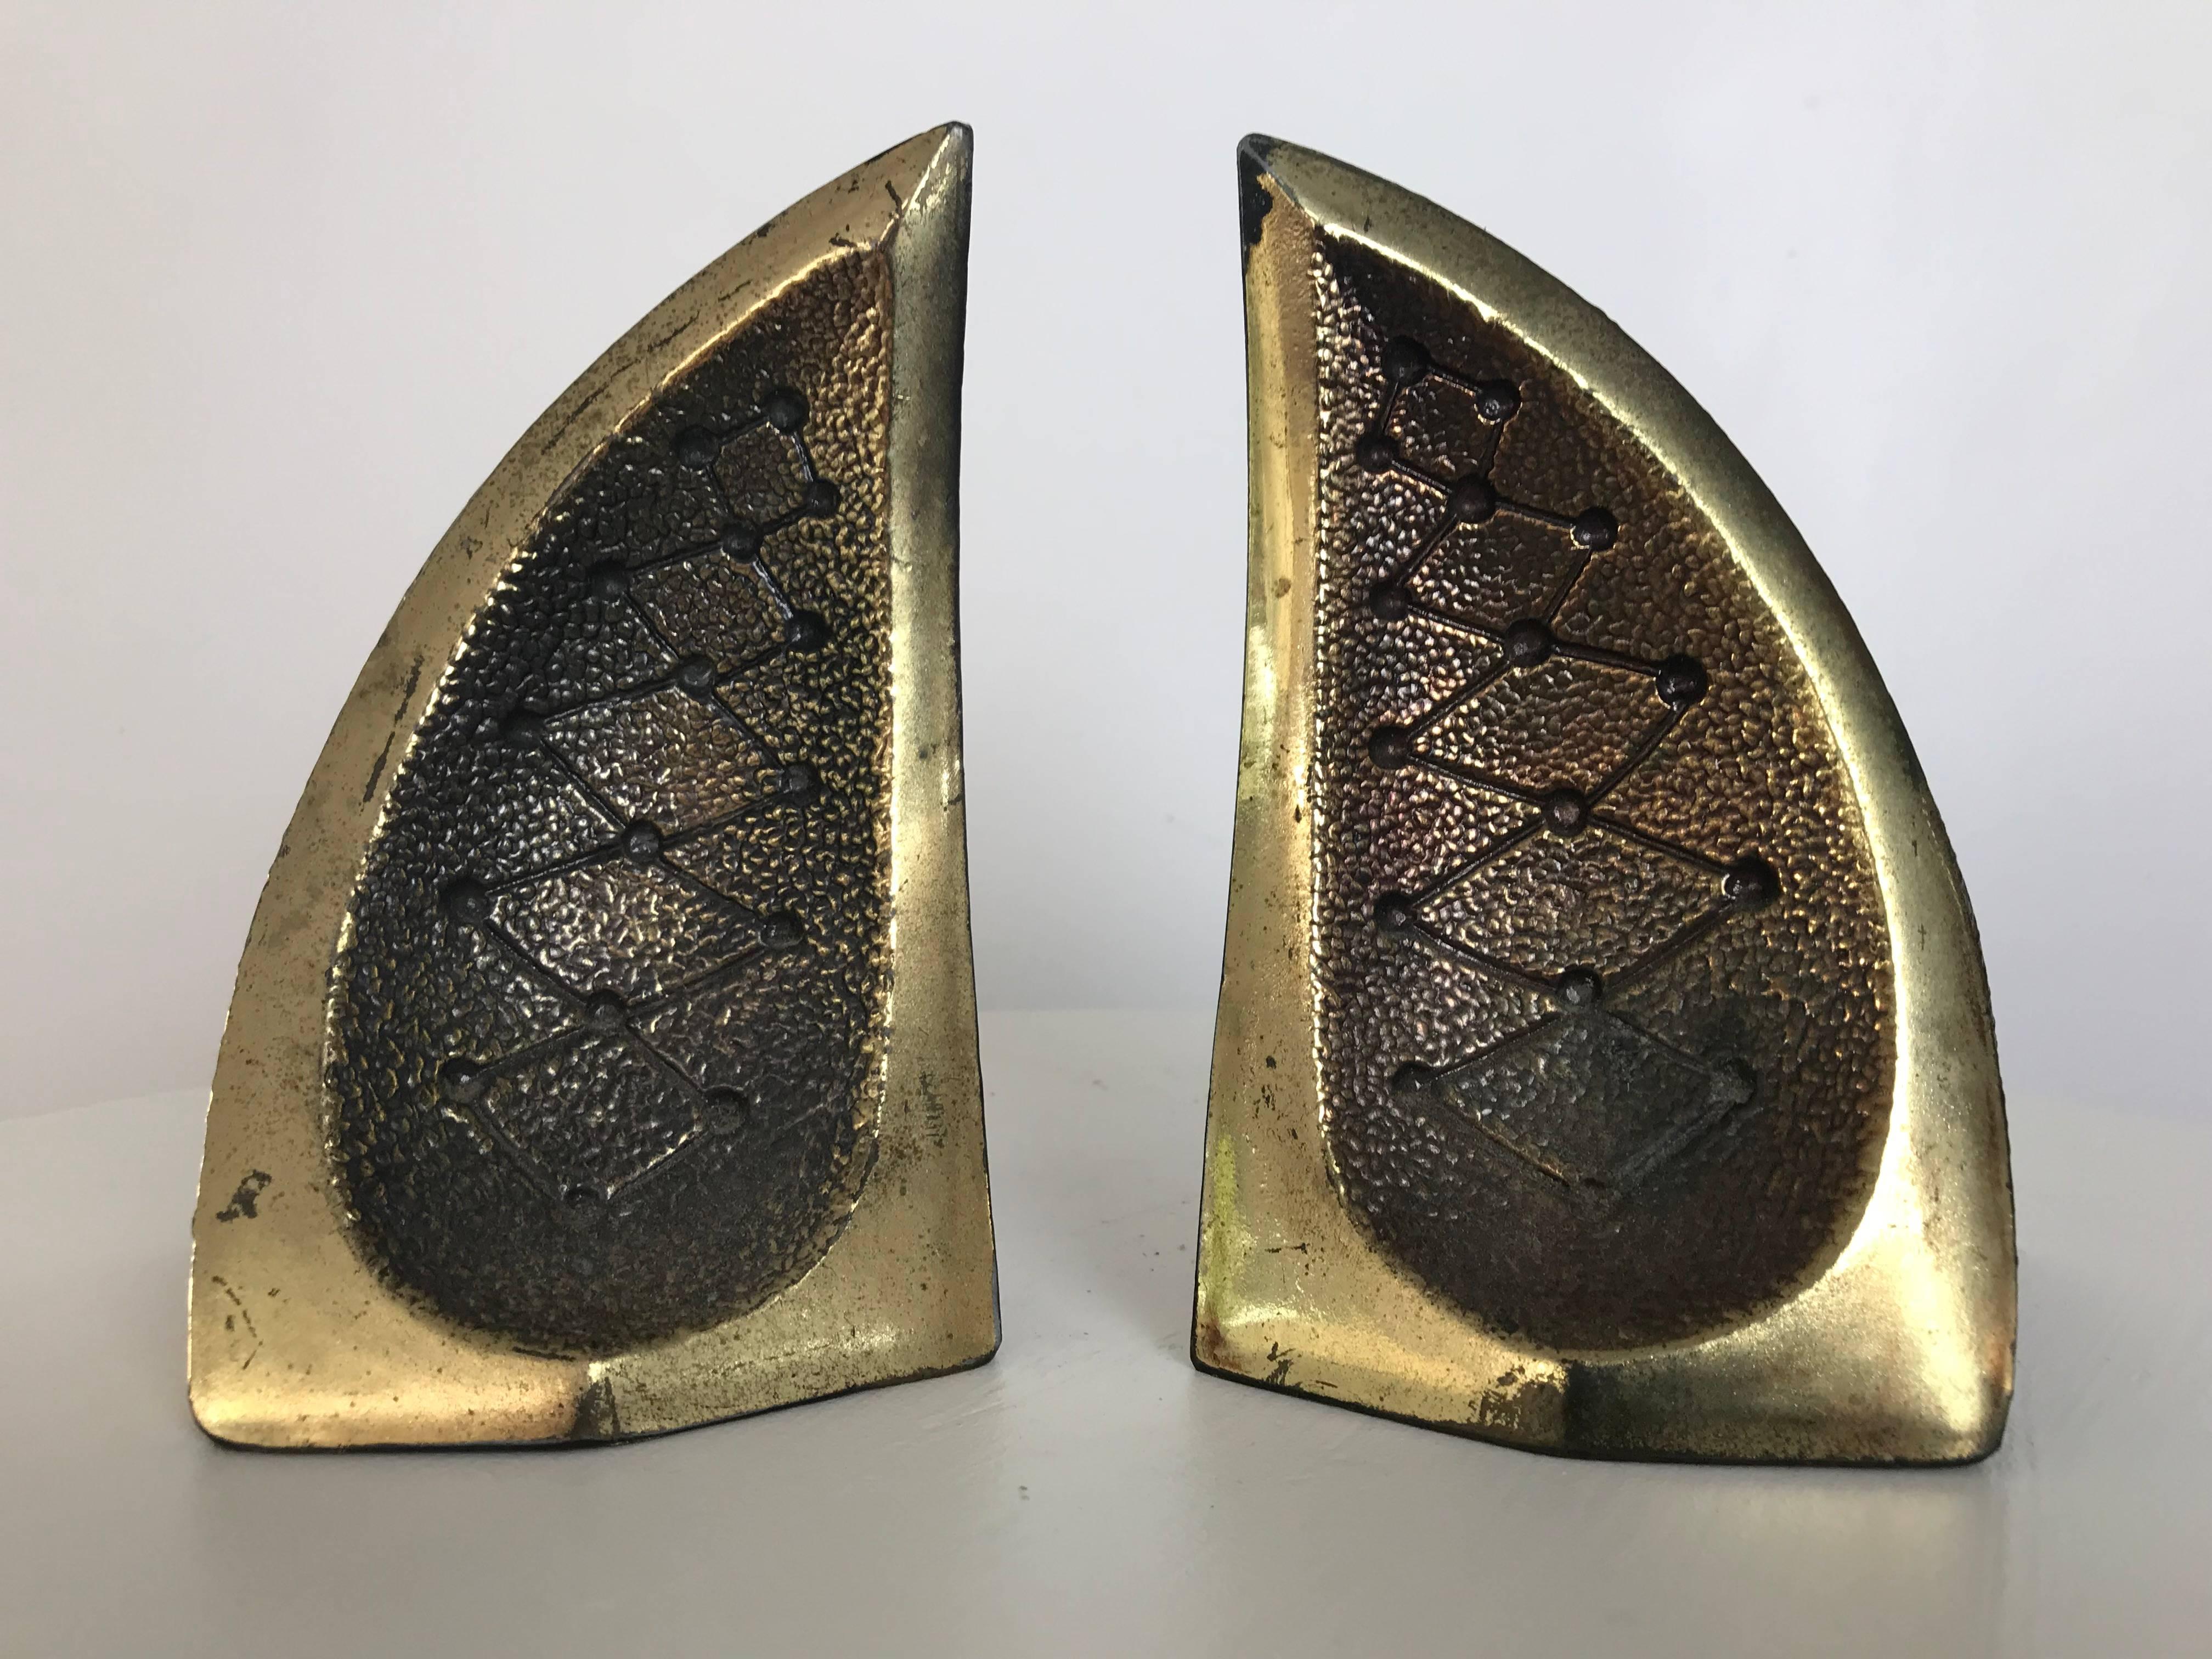 A beautiful and hard-to-find designed set of bookends by Ben Seibel for Jenfredware; Raymor. Brass-plated metal. Original condition - some spots of wear. Please see pictures, circa 1950s .

First edition set of Viking Portable Poets books (1950)